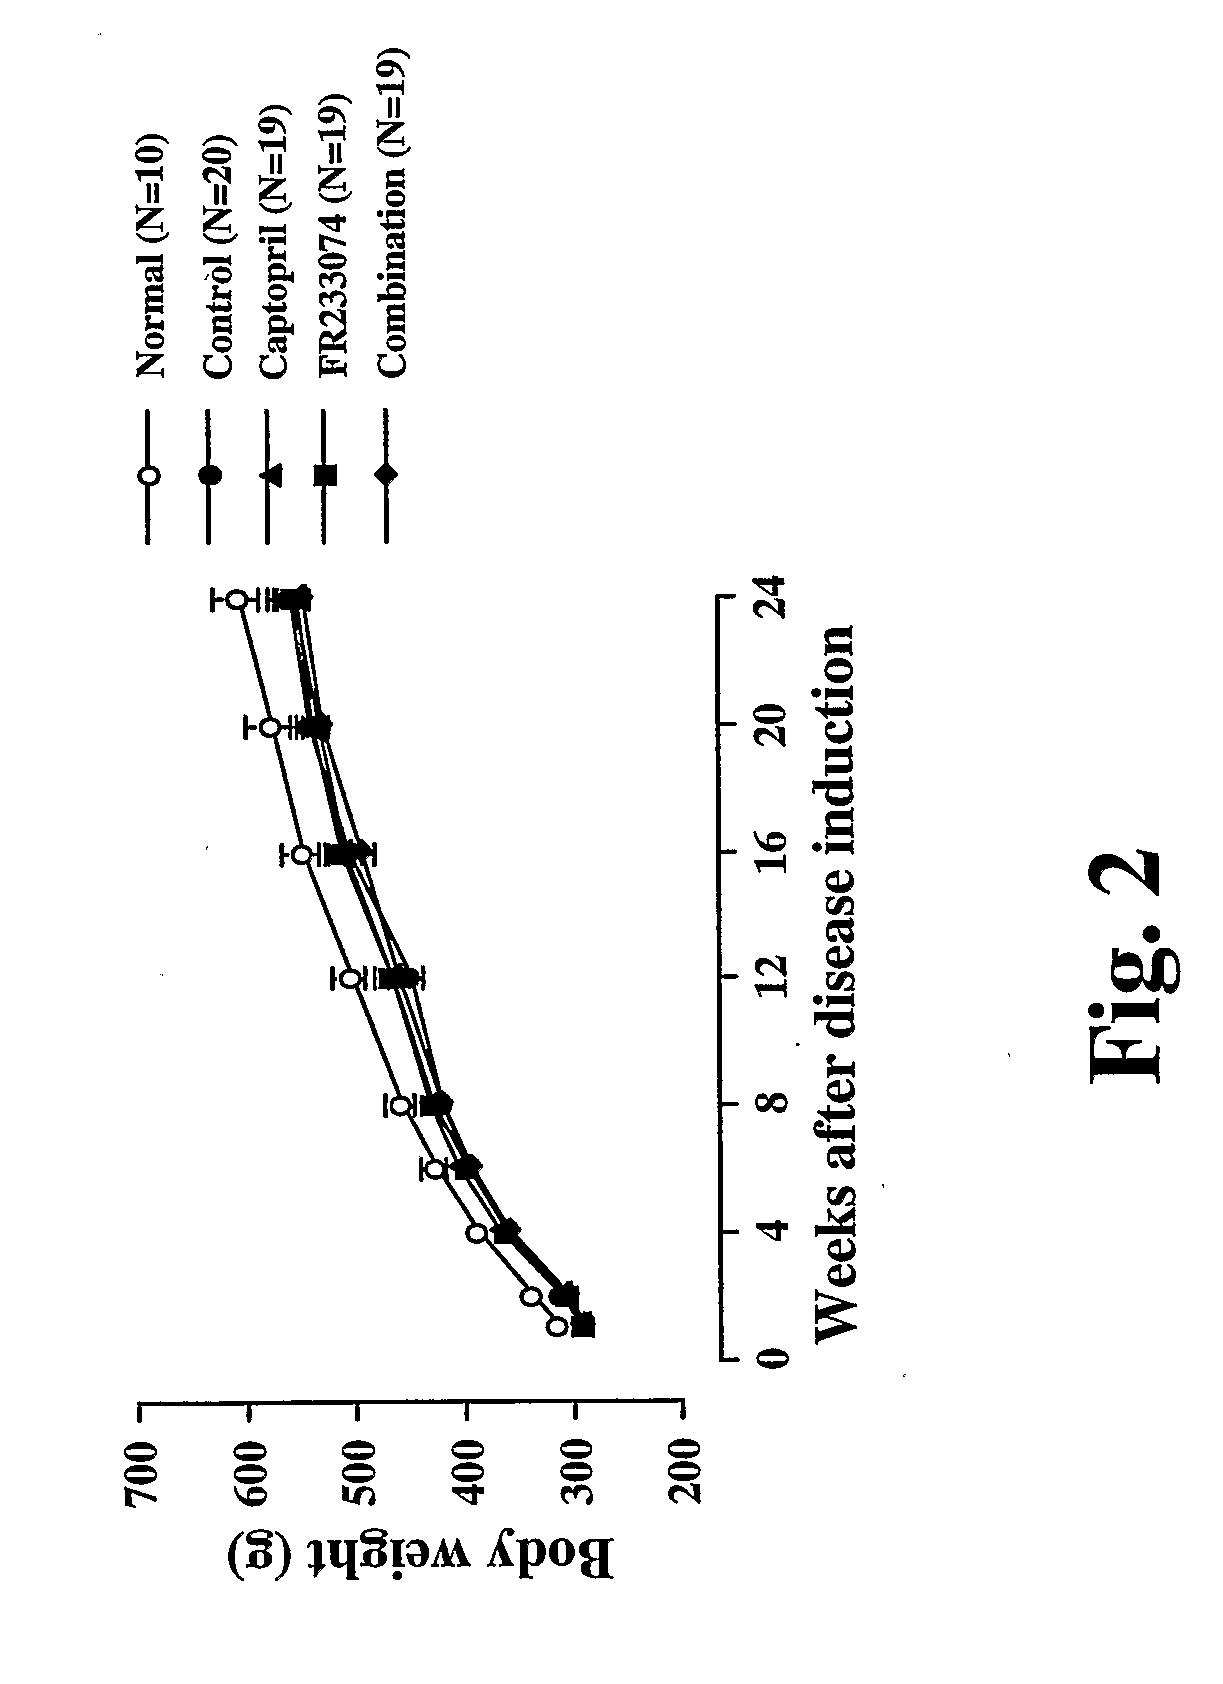 Combination of Prostaglandin E2 Receptor Antagonists and Renin-Angiotensin System Inhibitors for Treating Renal Diseases